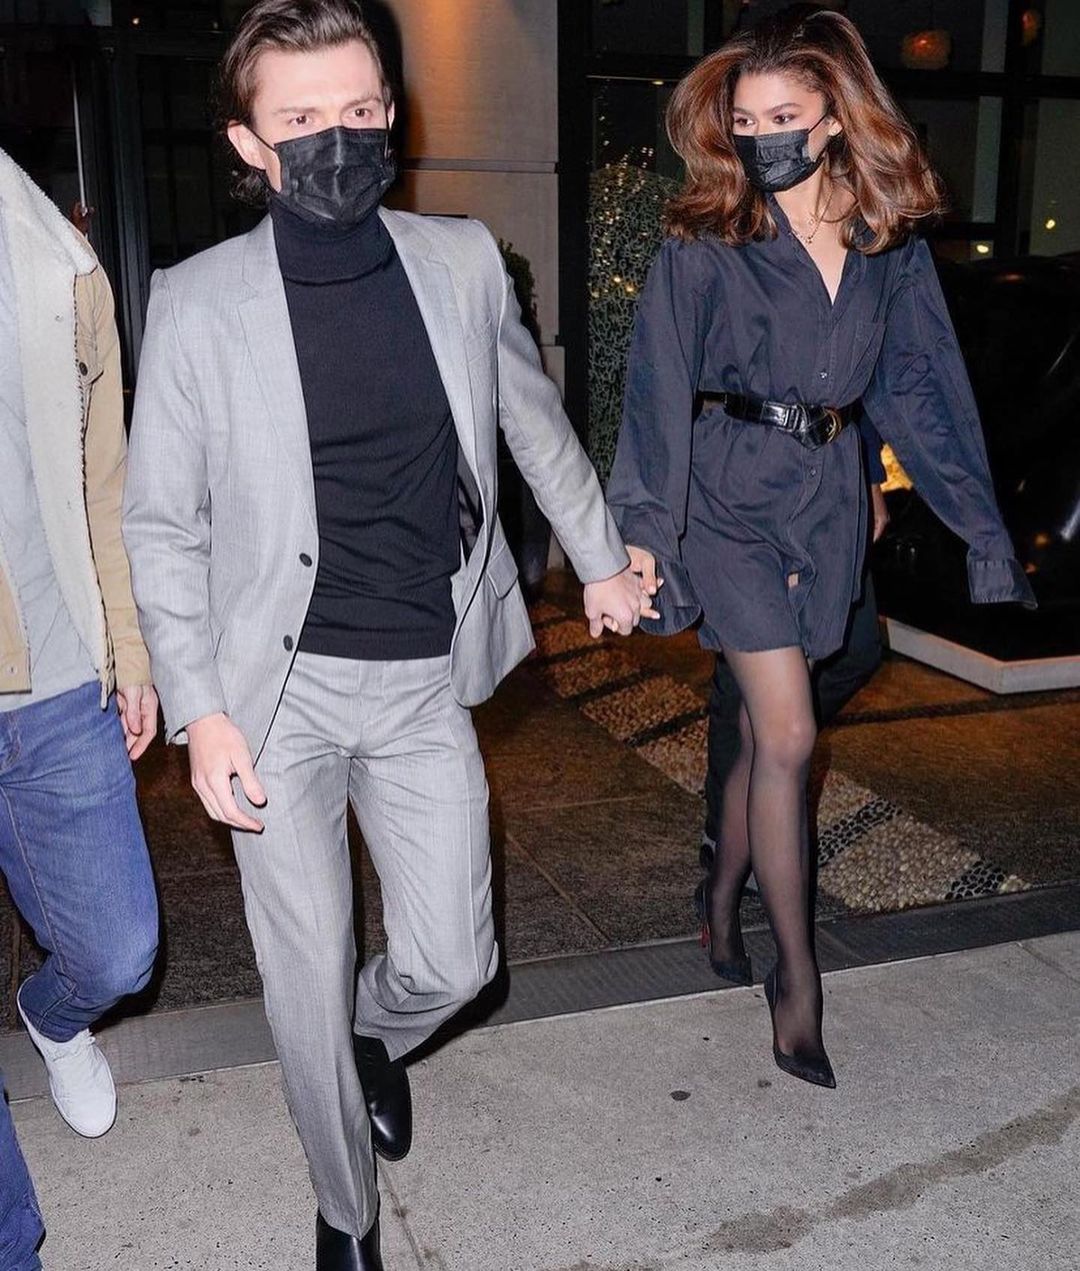 Celebrity Couples wearing Matching Outfits